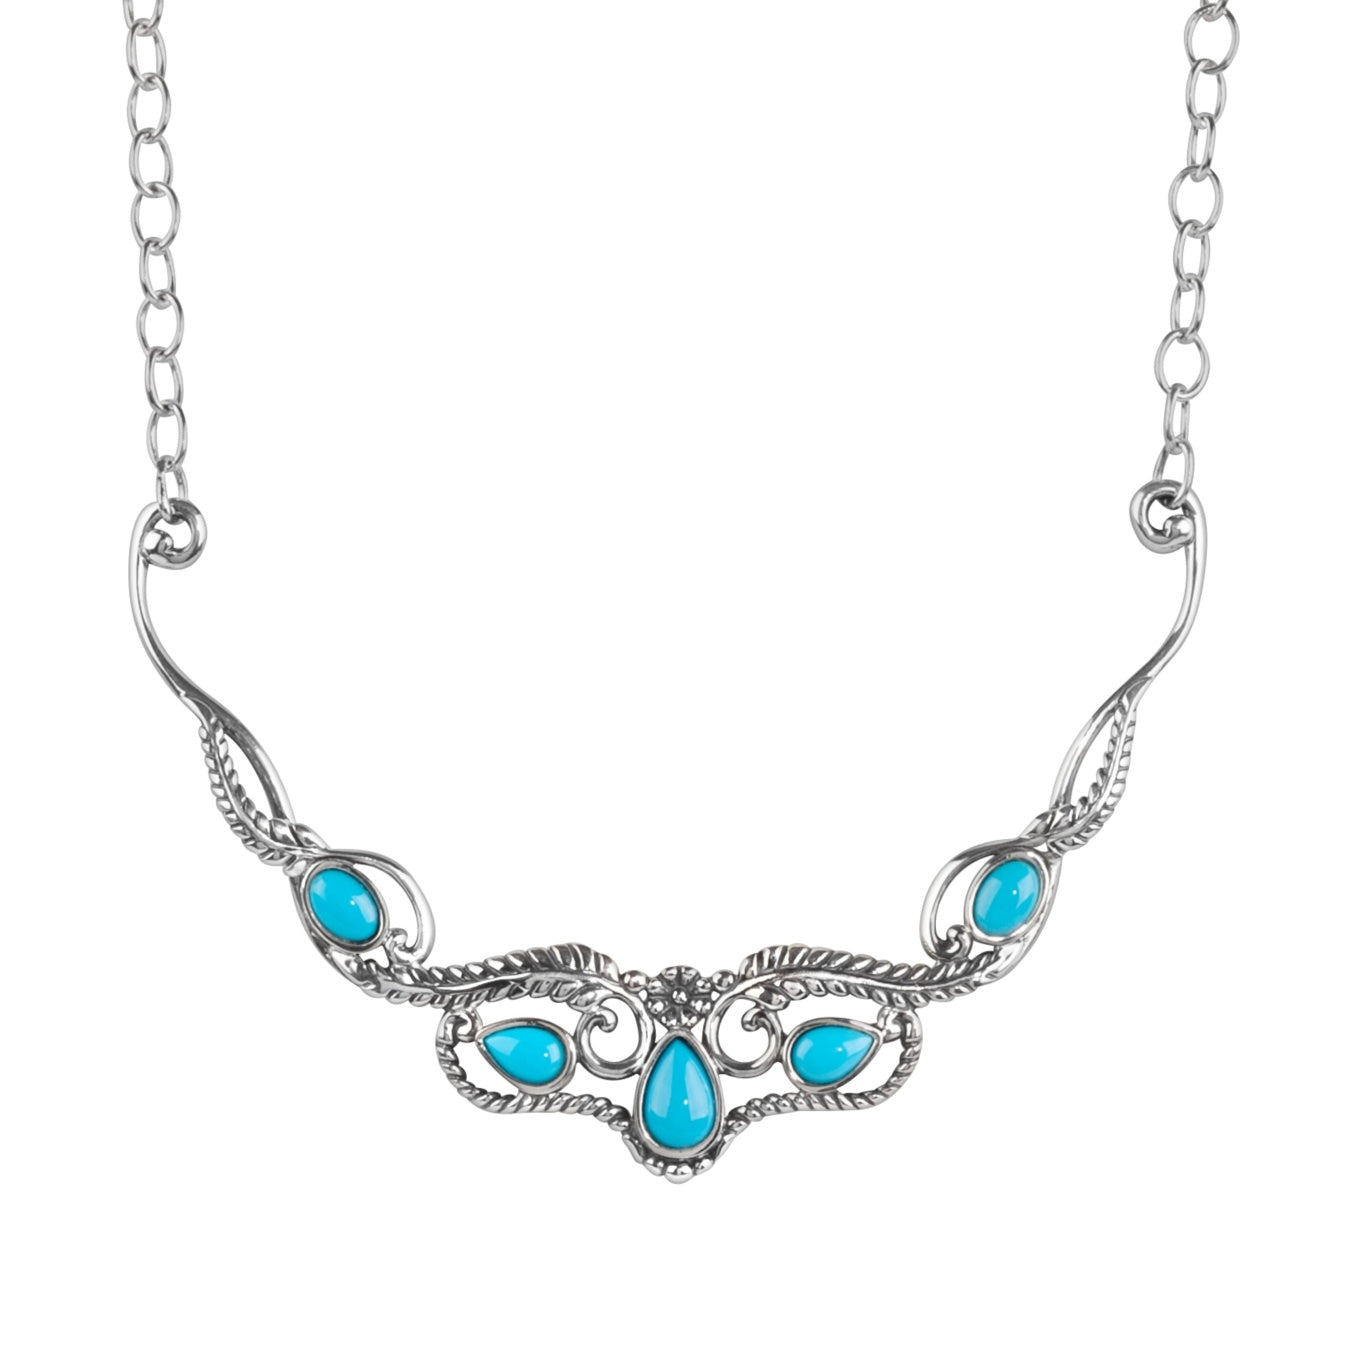 1_31828_ZM_American-West-Sleeping-Beauty-Turquoise-Statement-Necklace